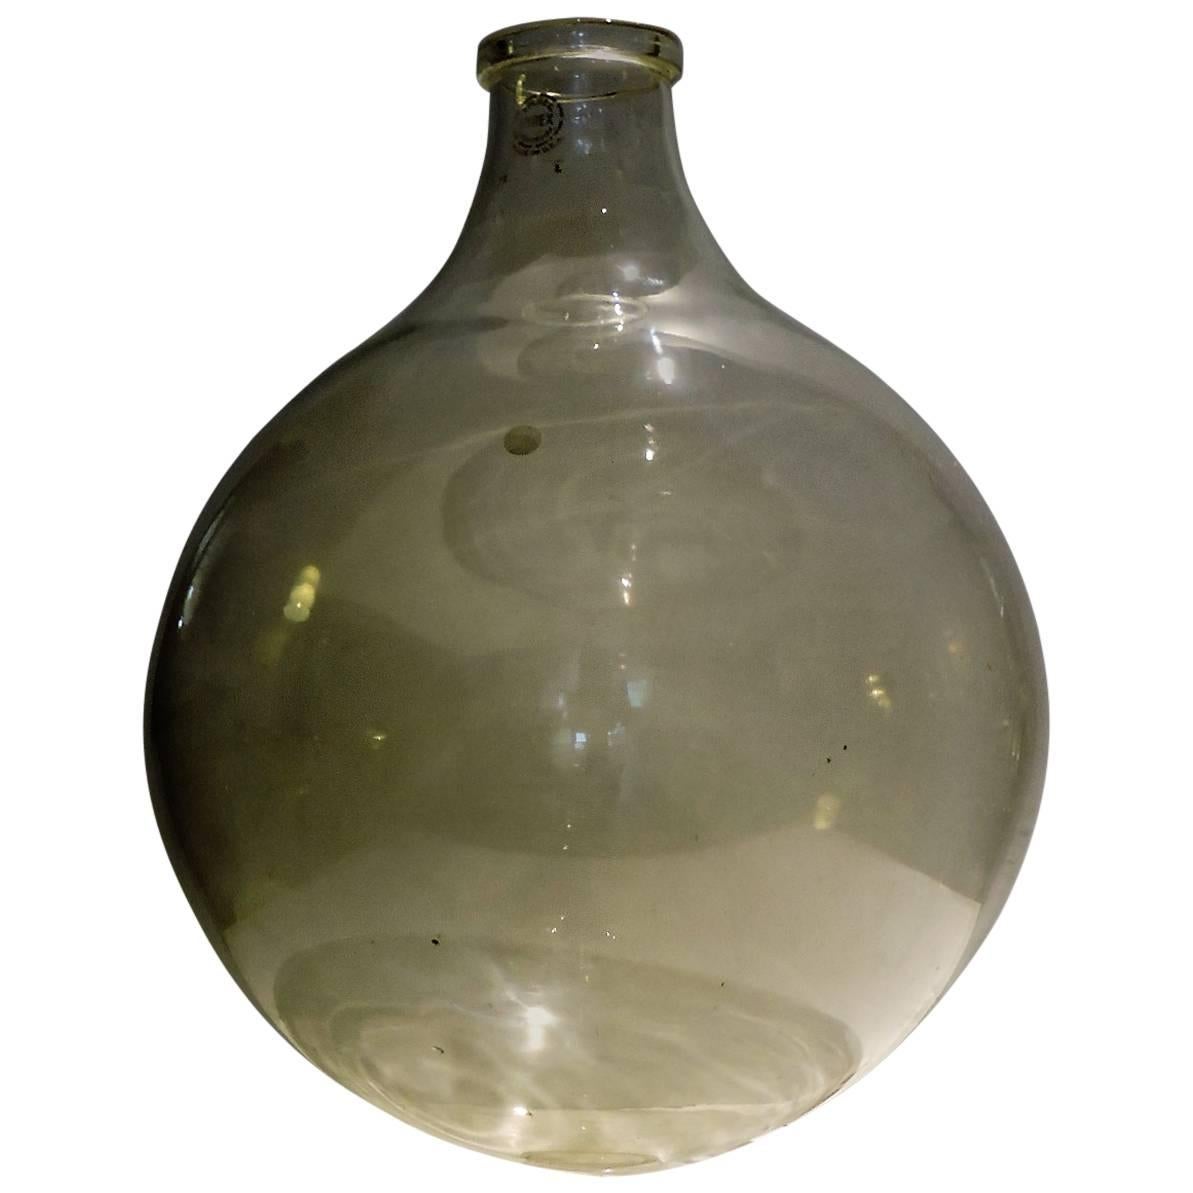 Massive Industrial Old Pyrex Laboratory Carboy Bottle